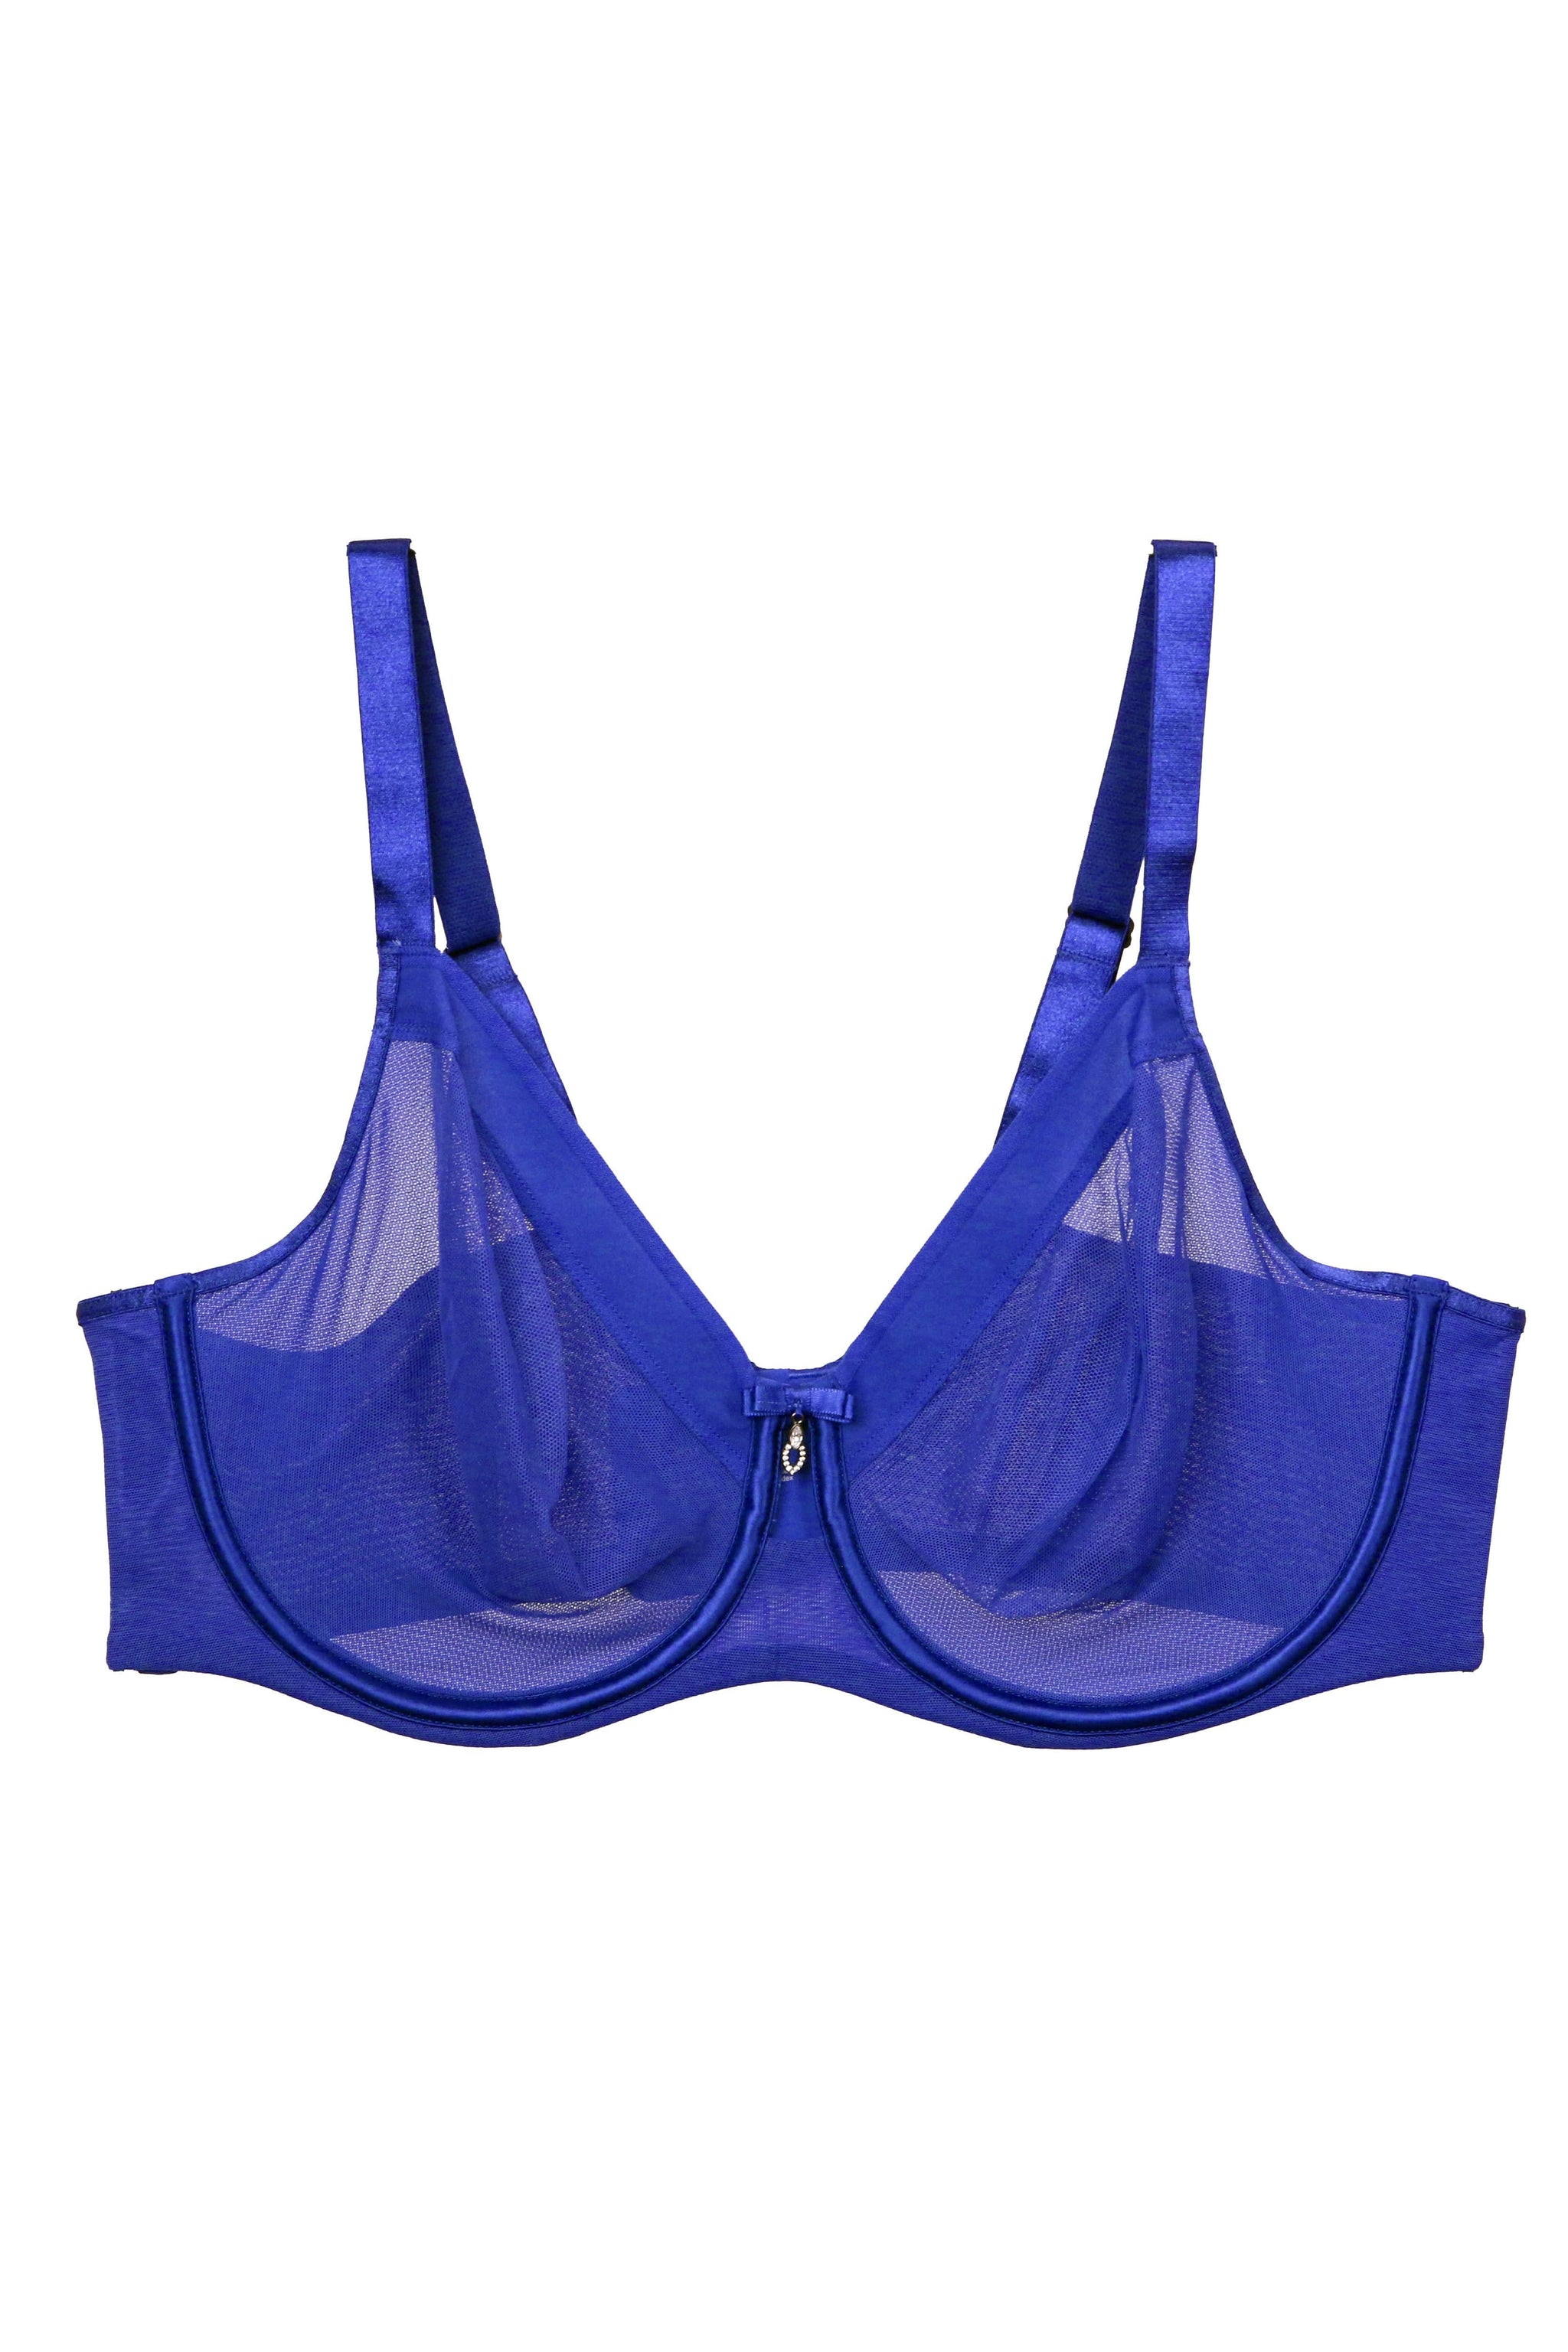 SOMA Lamour LACE Unlined PLUNGE Underwired Bra, Blue [CHOOSE YOUR SIZE]  *New